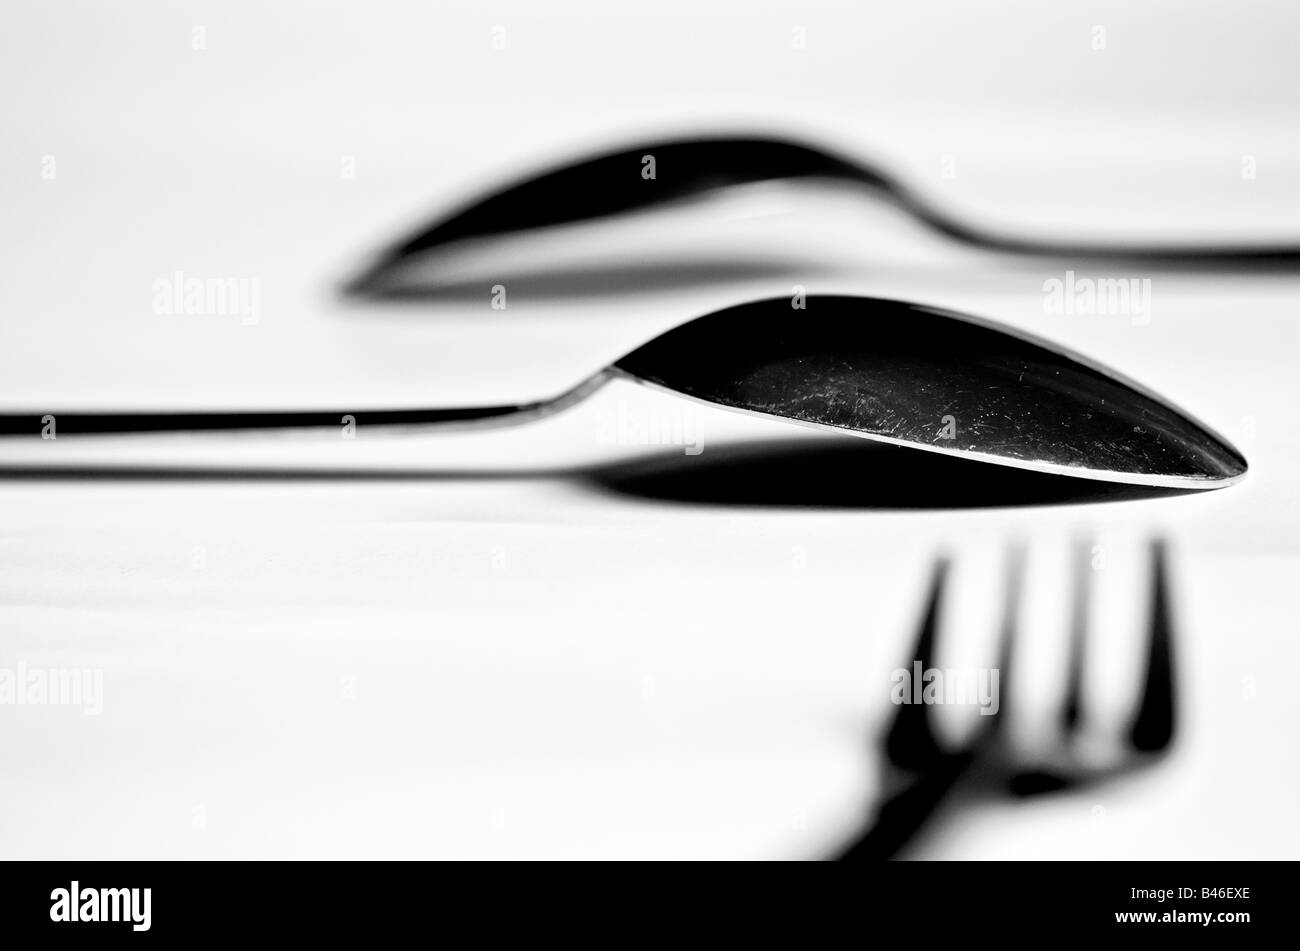 two spoons and a fork on a white table Stock Photo